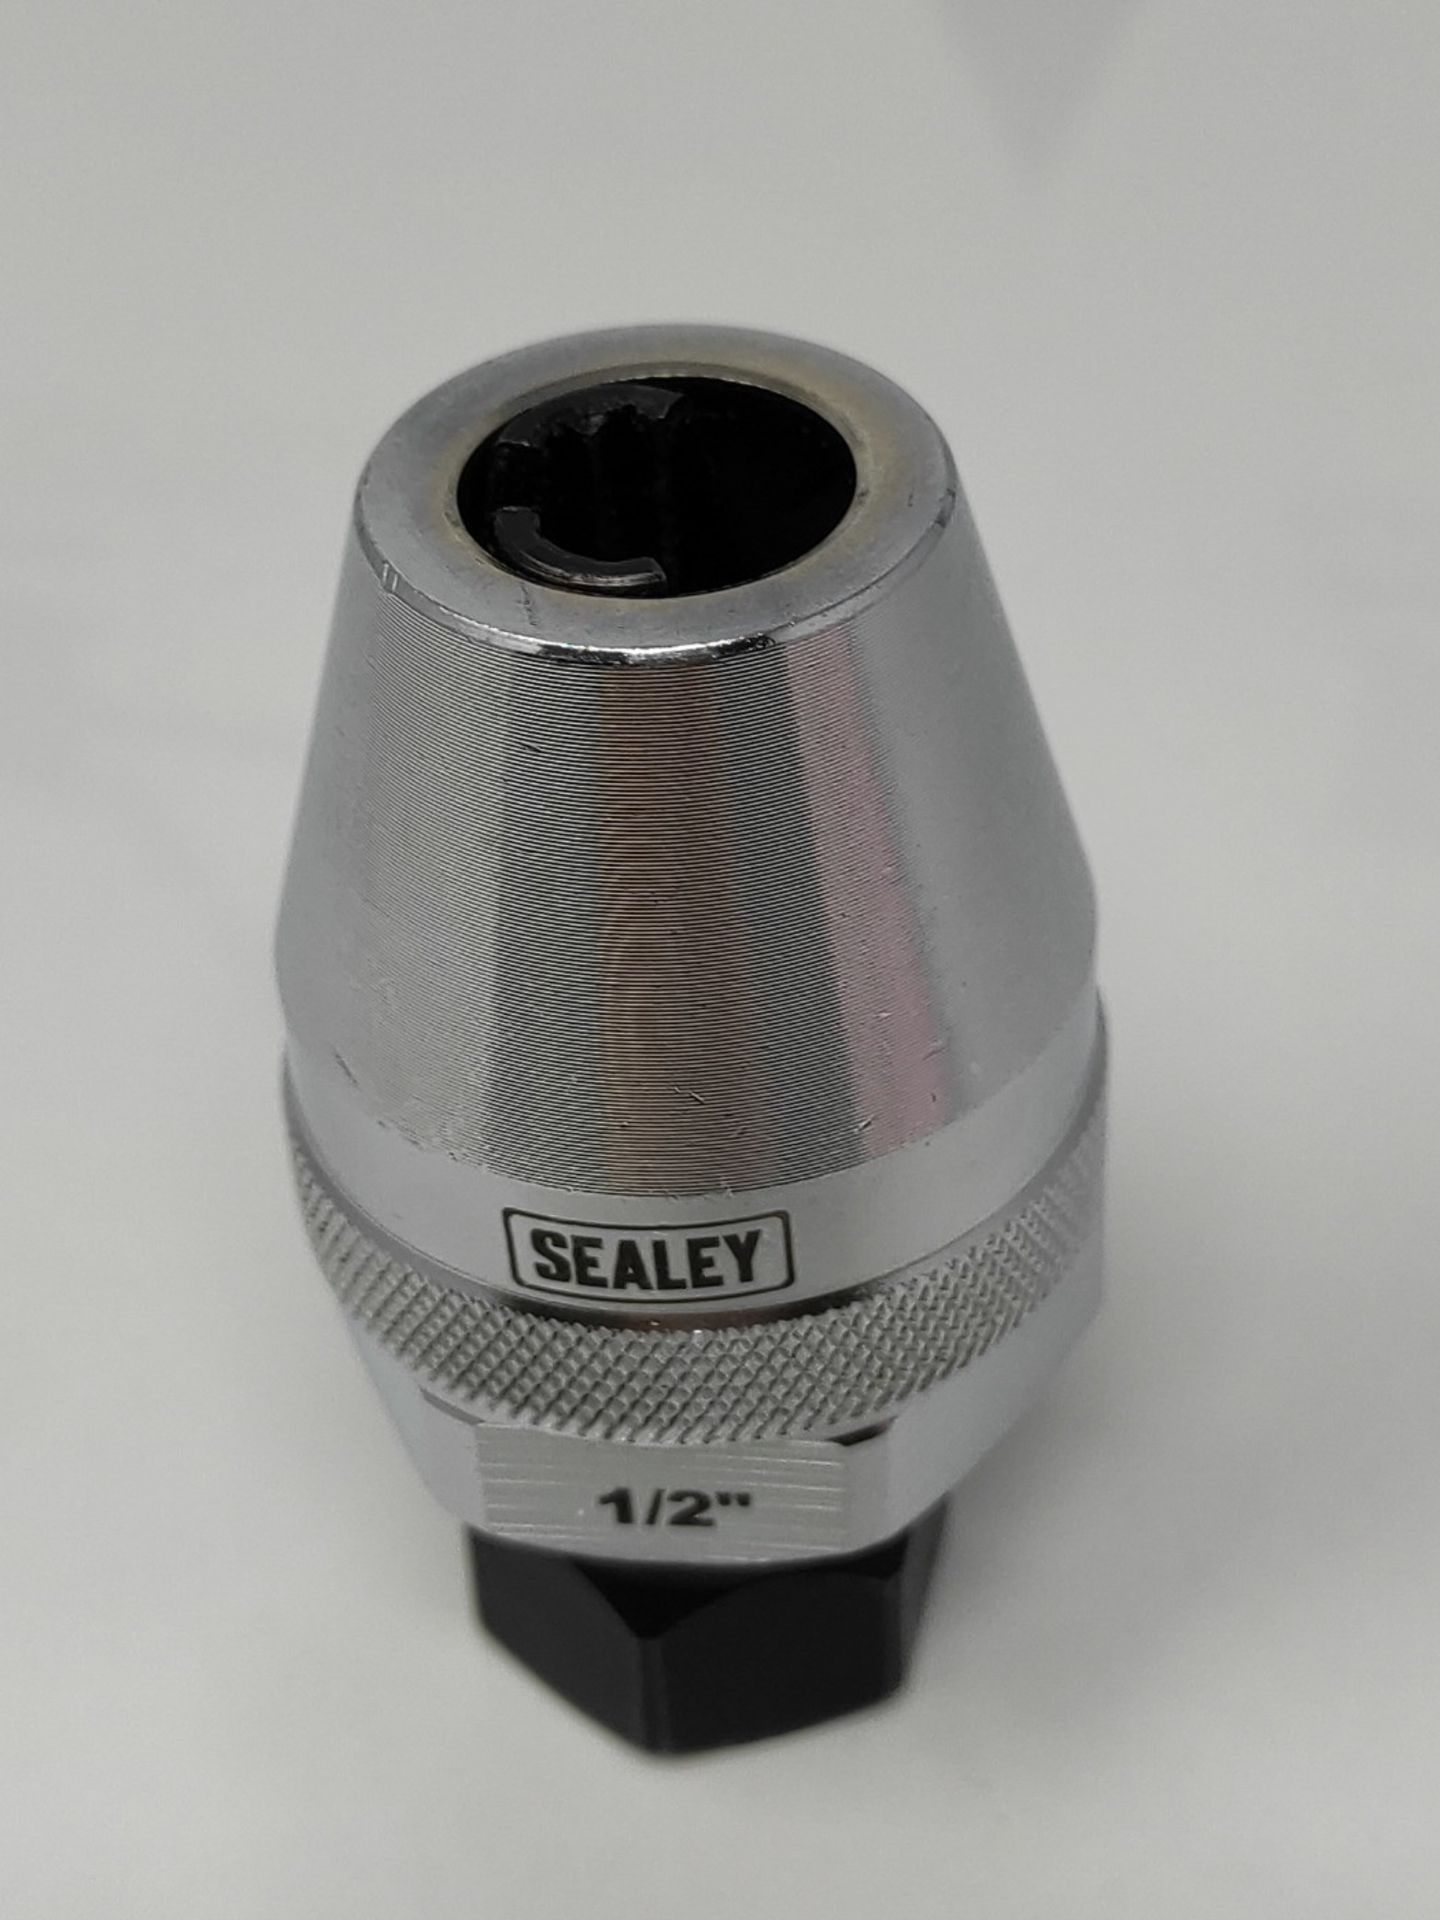 Sealey AK718 Impact Stud Extractor, 6-12 mm 1/2 inch Sq Drive - Image 2 of 2